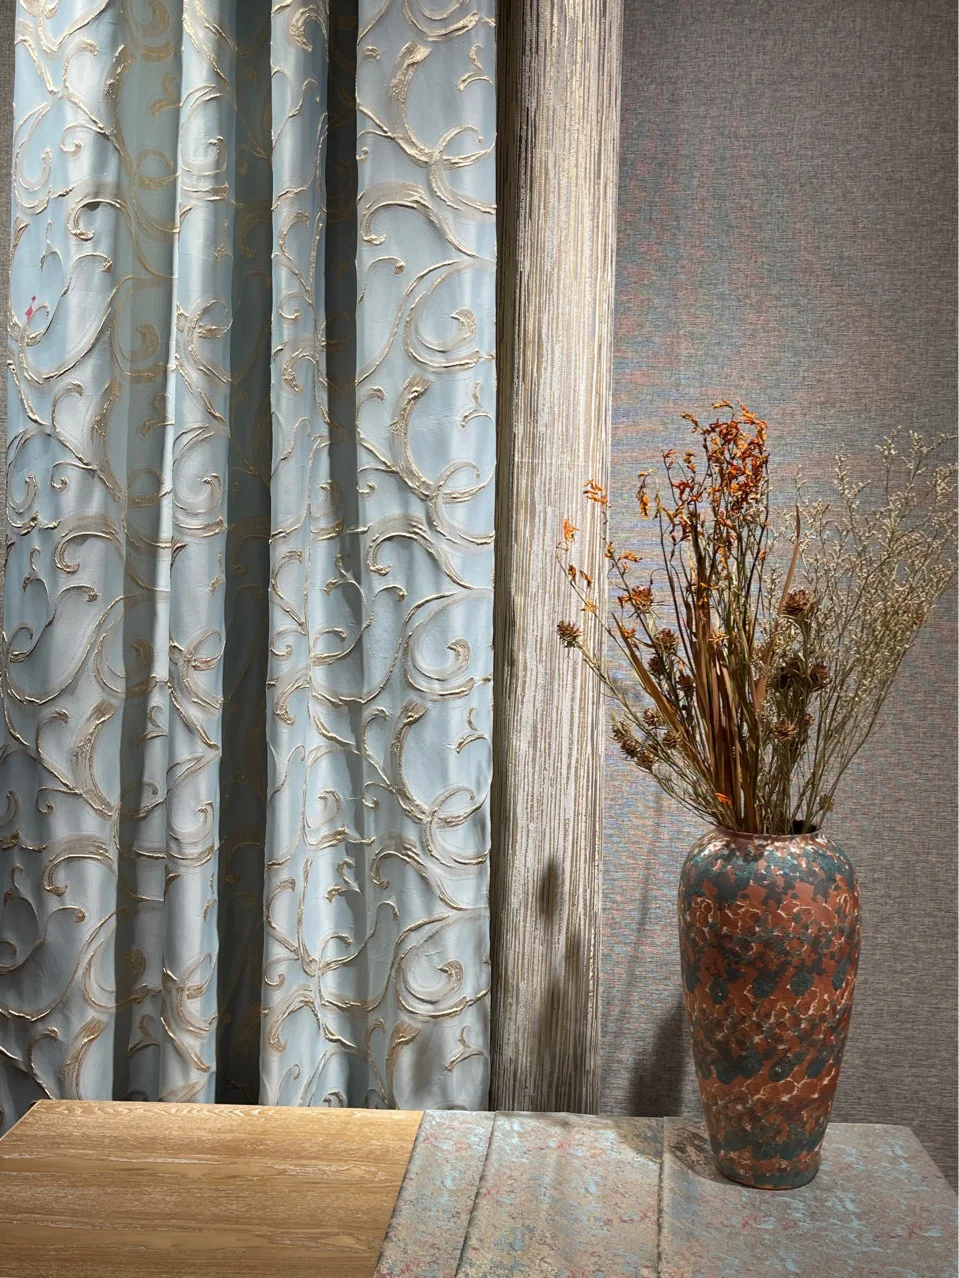 Curtains for Living Dining Room Bedroom Embossed Embroidered European Style Luxury Villa Fabric Palace Windows Door